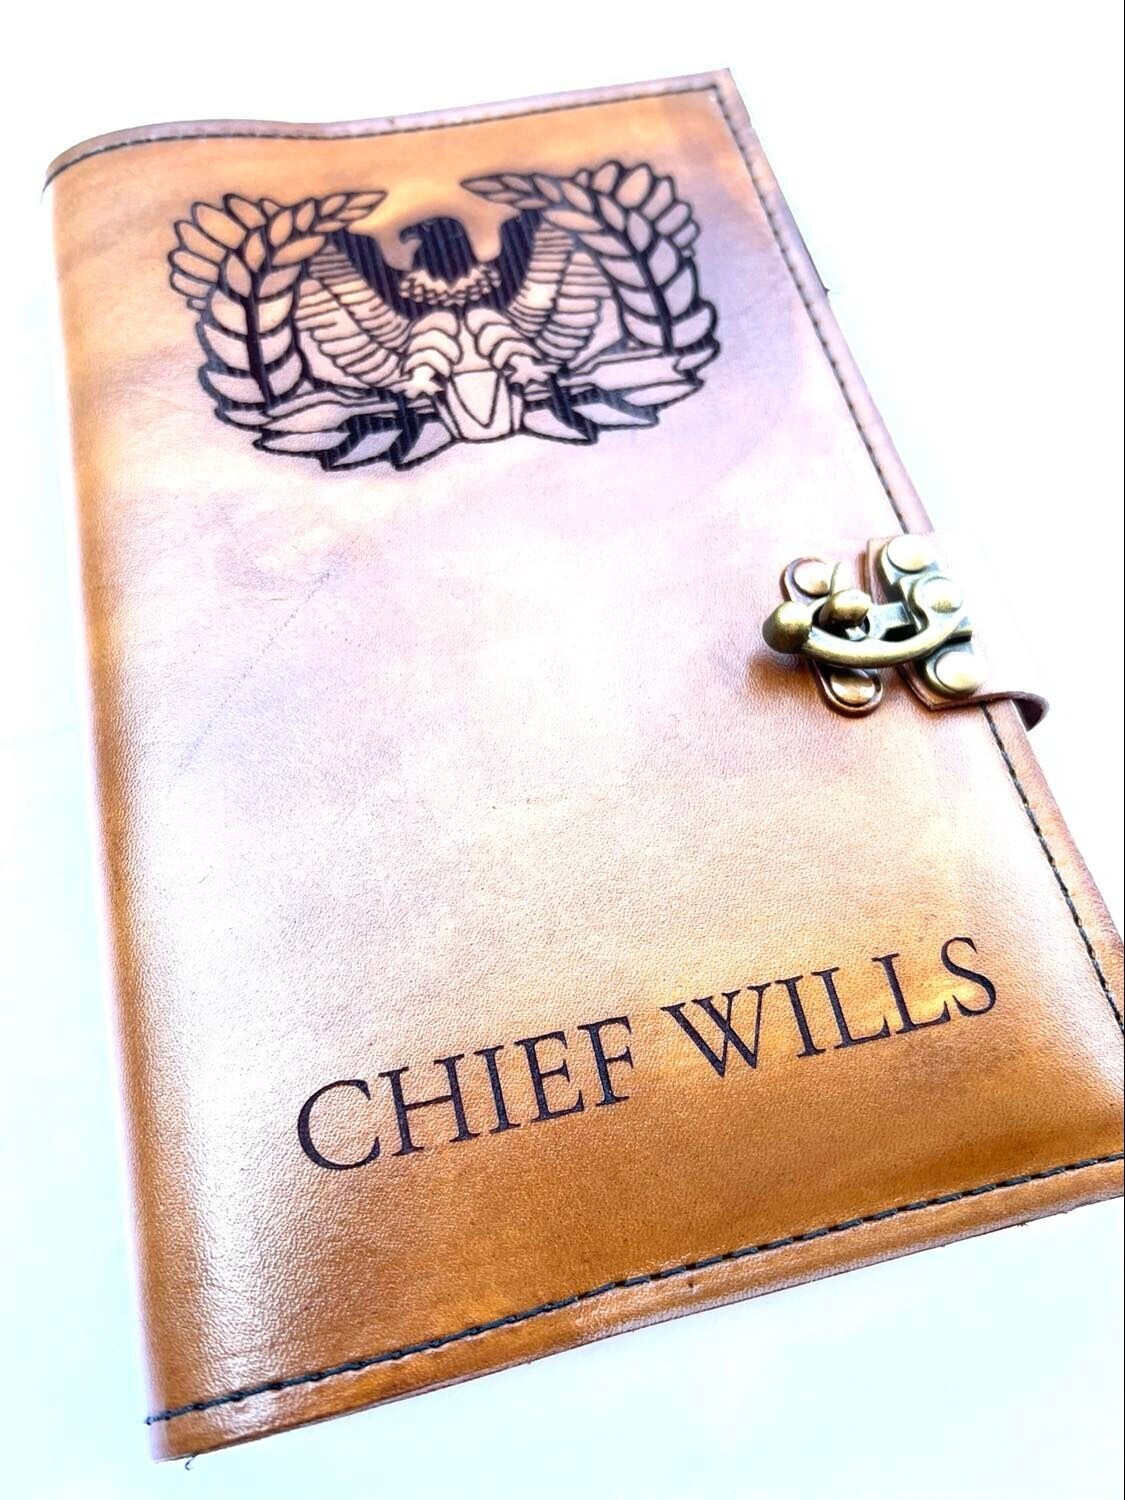 Warrant Officer Gift - Personalized Leather Book Cover - Military Journal - Mens Notebook - NCO Gift - Military Gift - Refillable Notebook